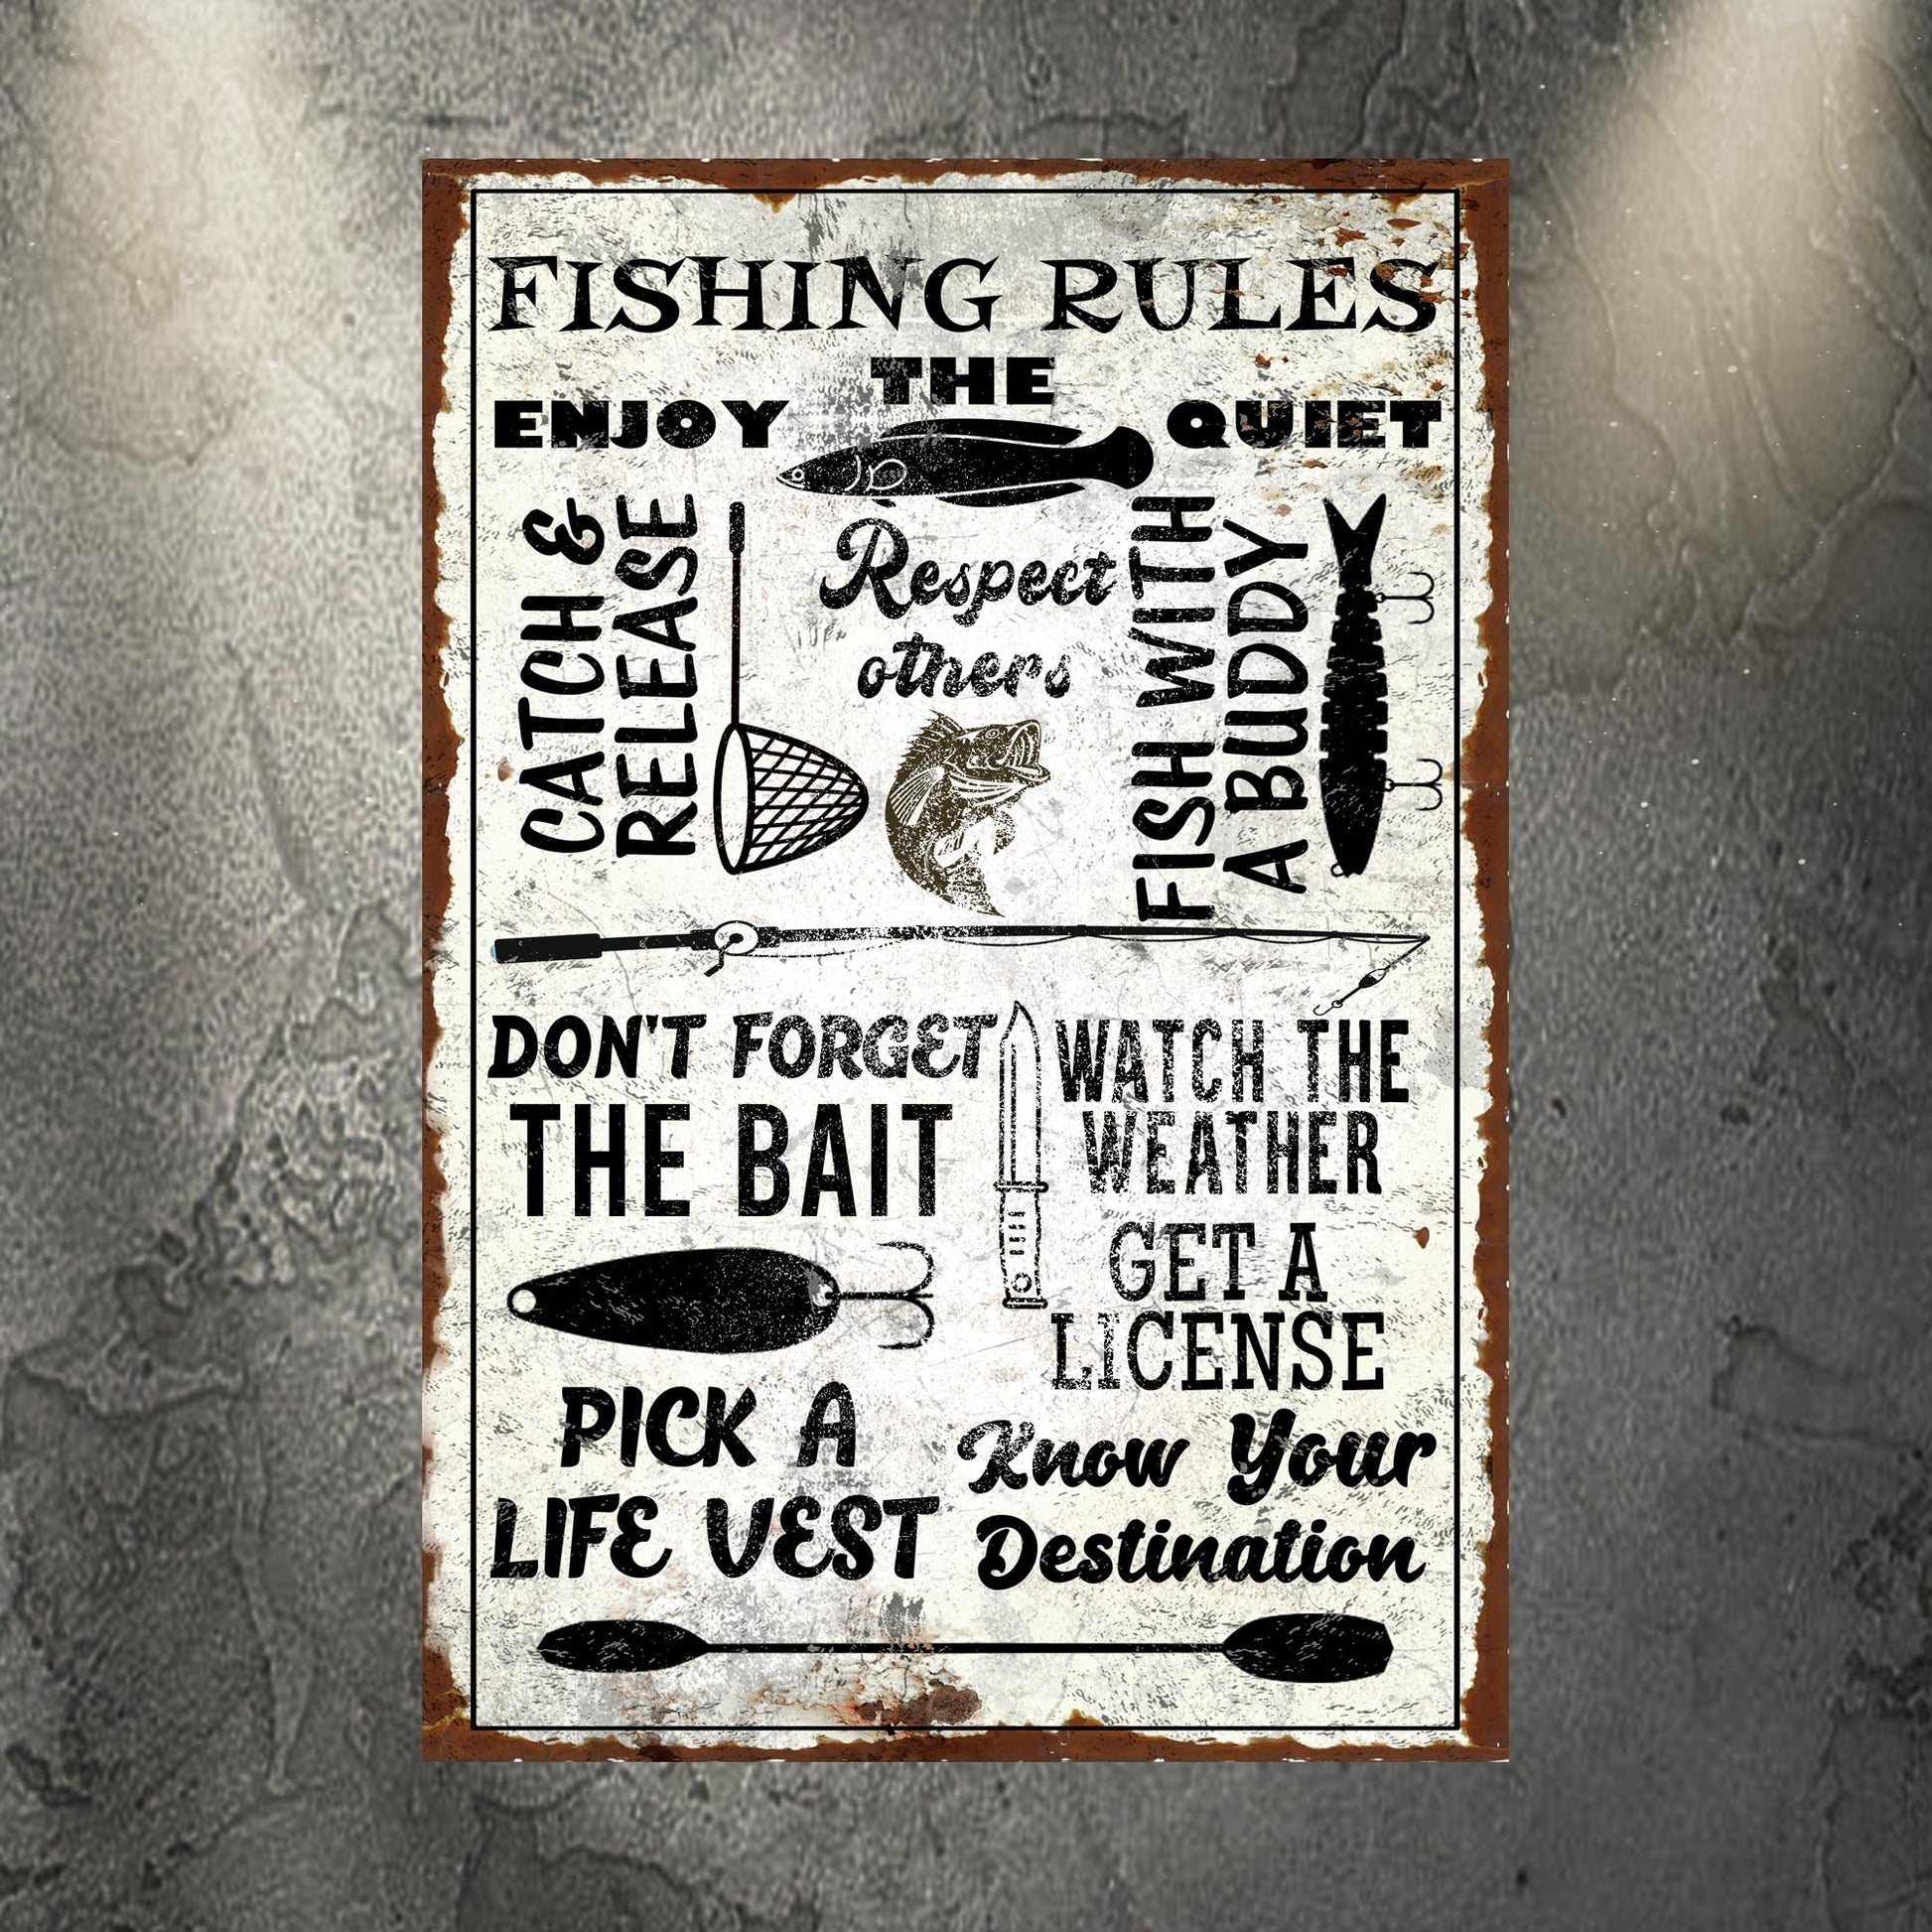 Fishing Rules Sign - Image by Tailored Canvases